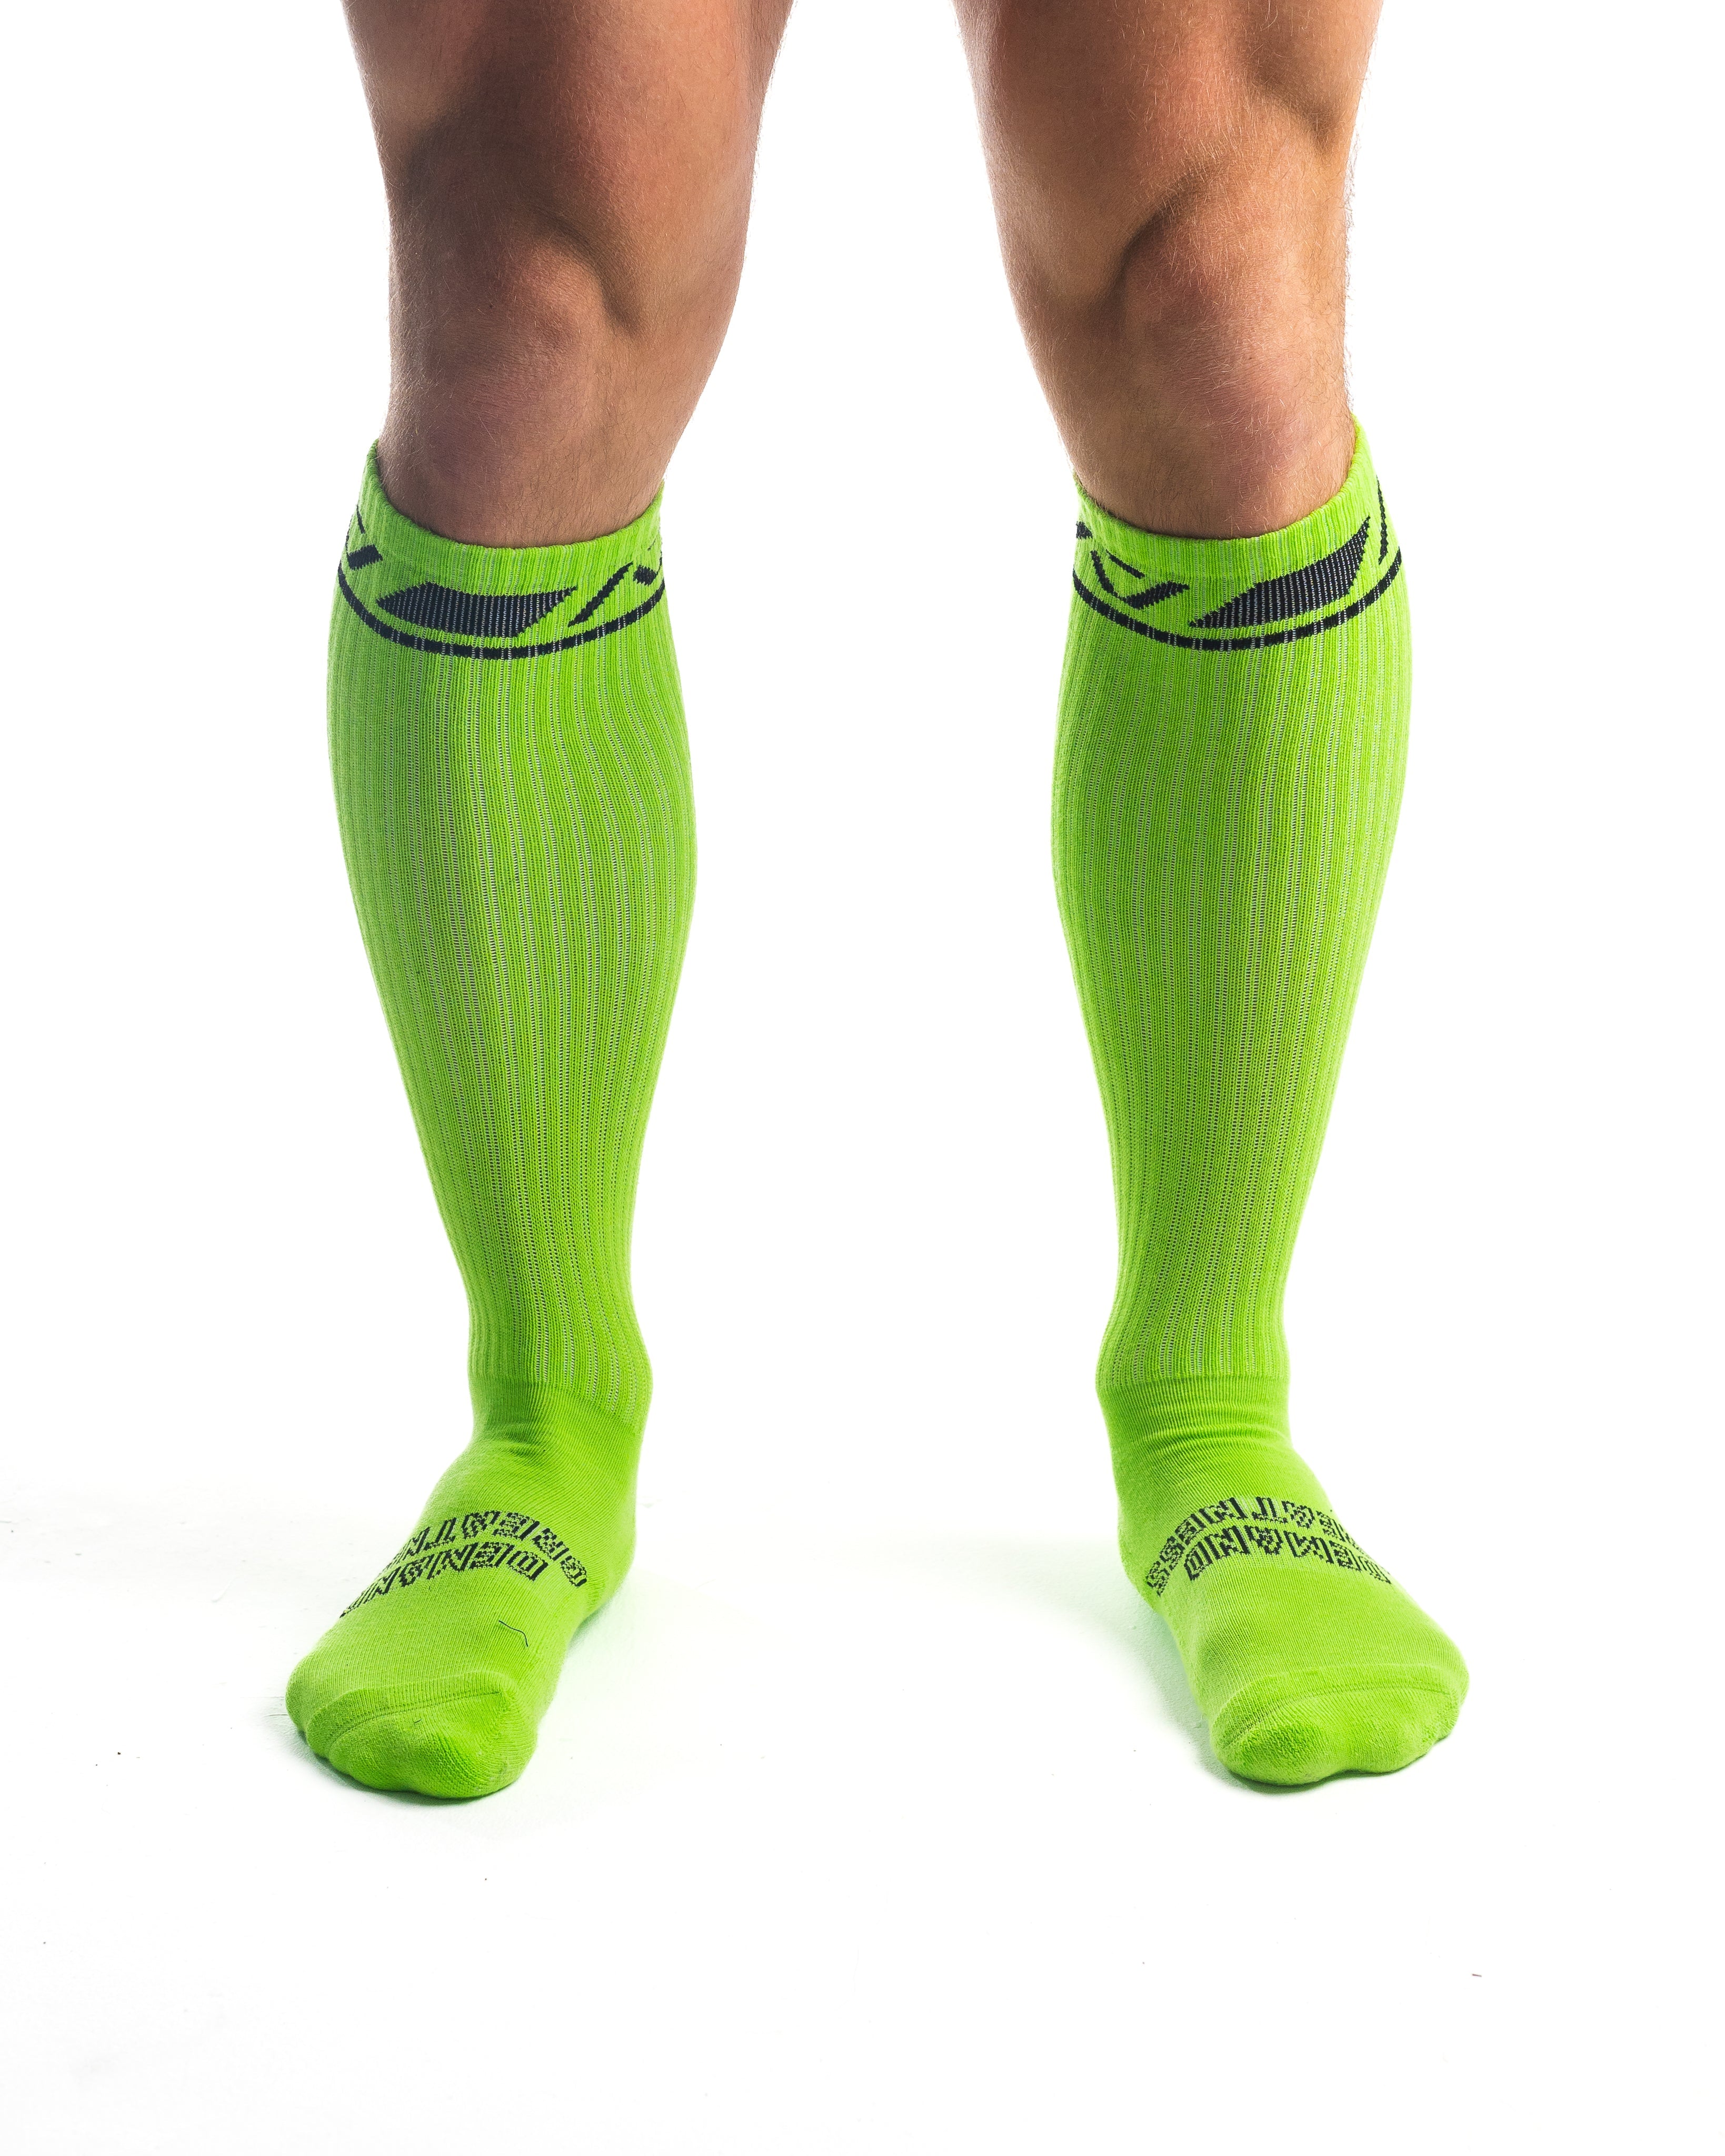 A7 Alien Deadlift socks are designed specifically for pulls and keep your shins protected from scrapes. A7 deadlift socks are a perfect pair to wear in training or powerlifting competition. The IPF Approved Kit includes Powerlifting Singlet, A7 Meet Shirt, A7 Deadlift Socks, Hourglass Knee Sleeves (Stiff Knee Sleeves and Rigor Mortis Knee Sleeves). All A7 Powerlifting Equipment shipping to UK, Norway, Switzerland and Iceland.